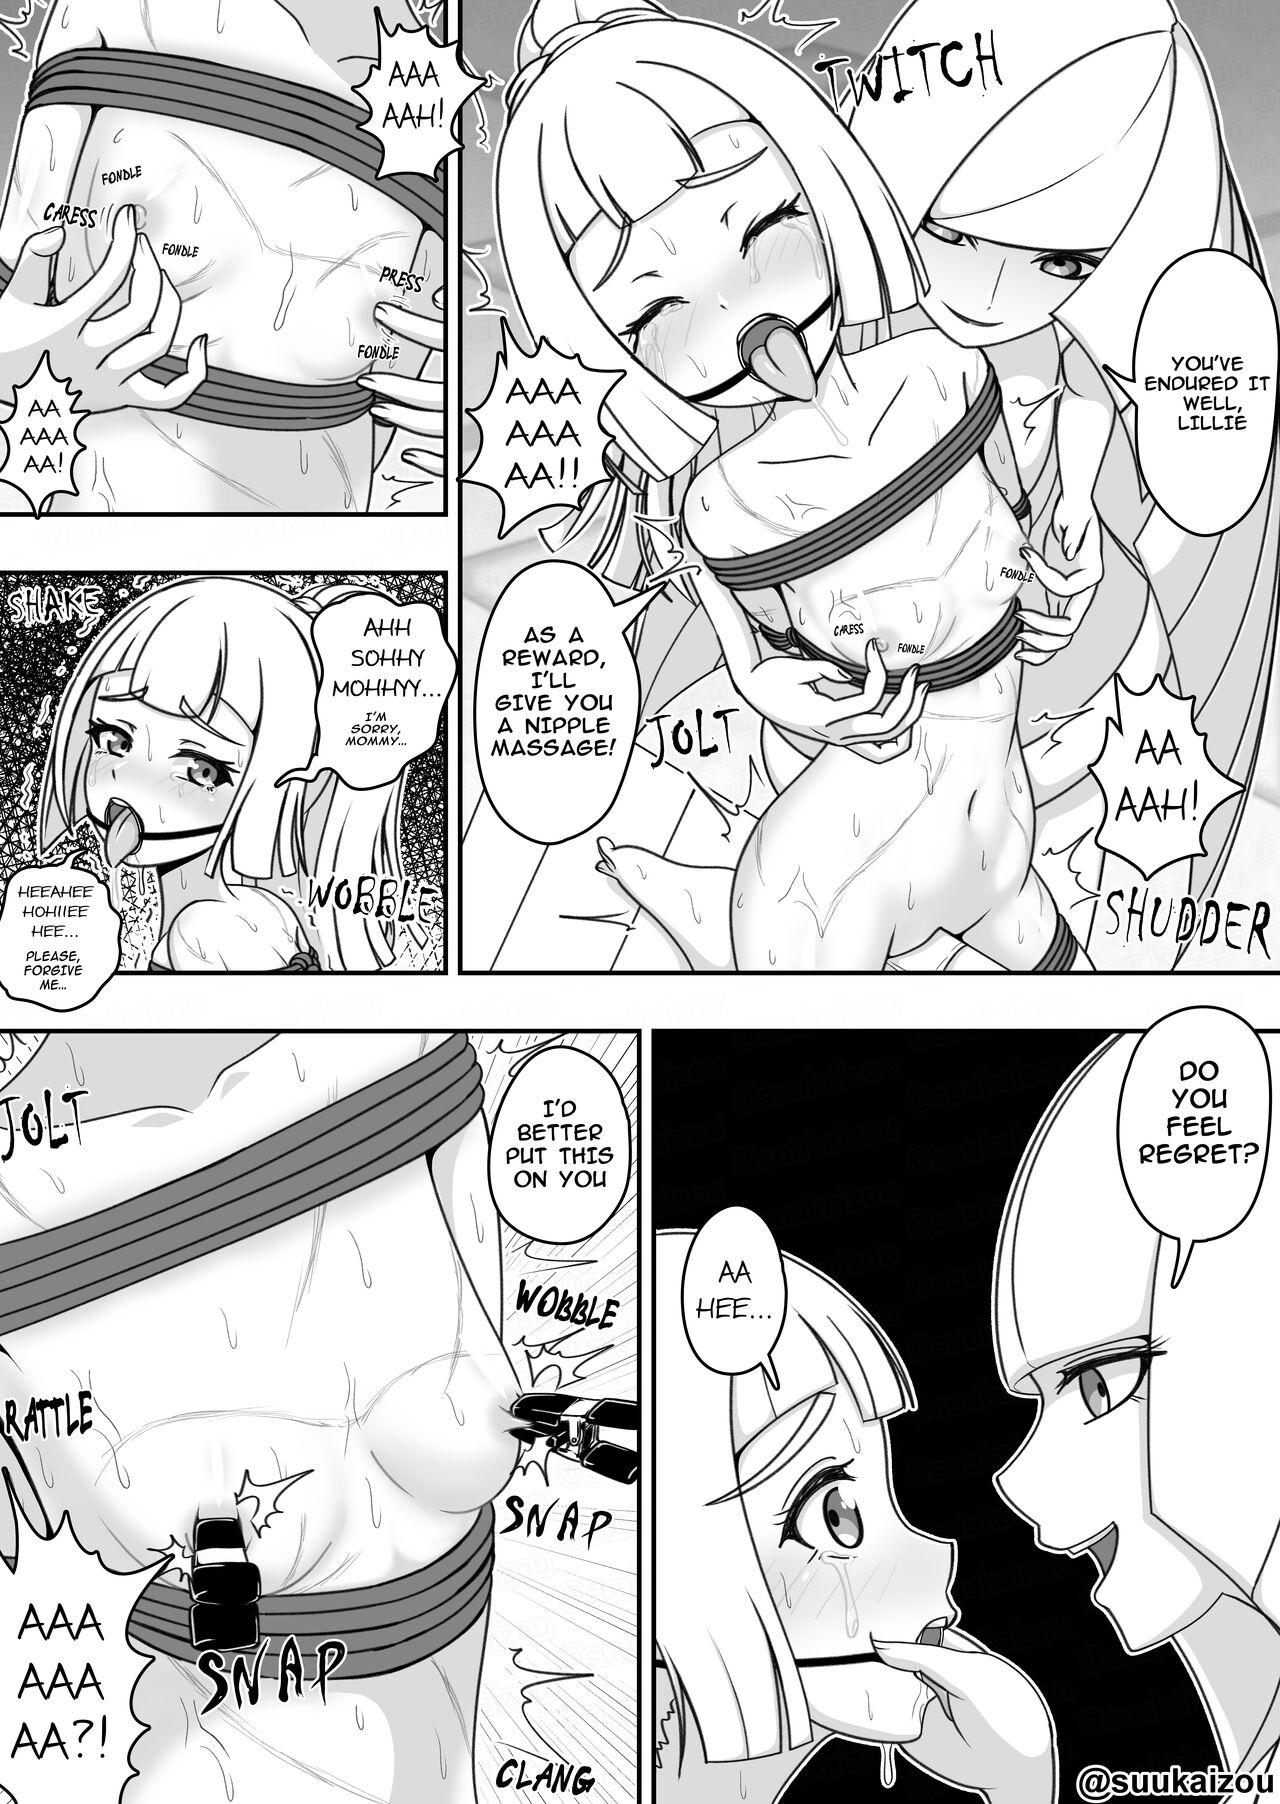 Colombia Lillie gets spanked by Lusamine. - Pokemon | pocket monsters Big Black Dick - Page 6